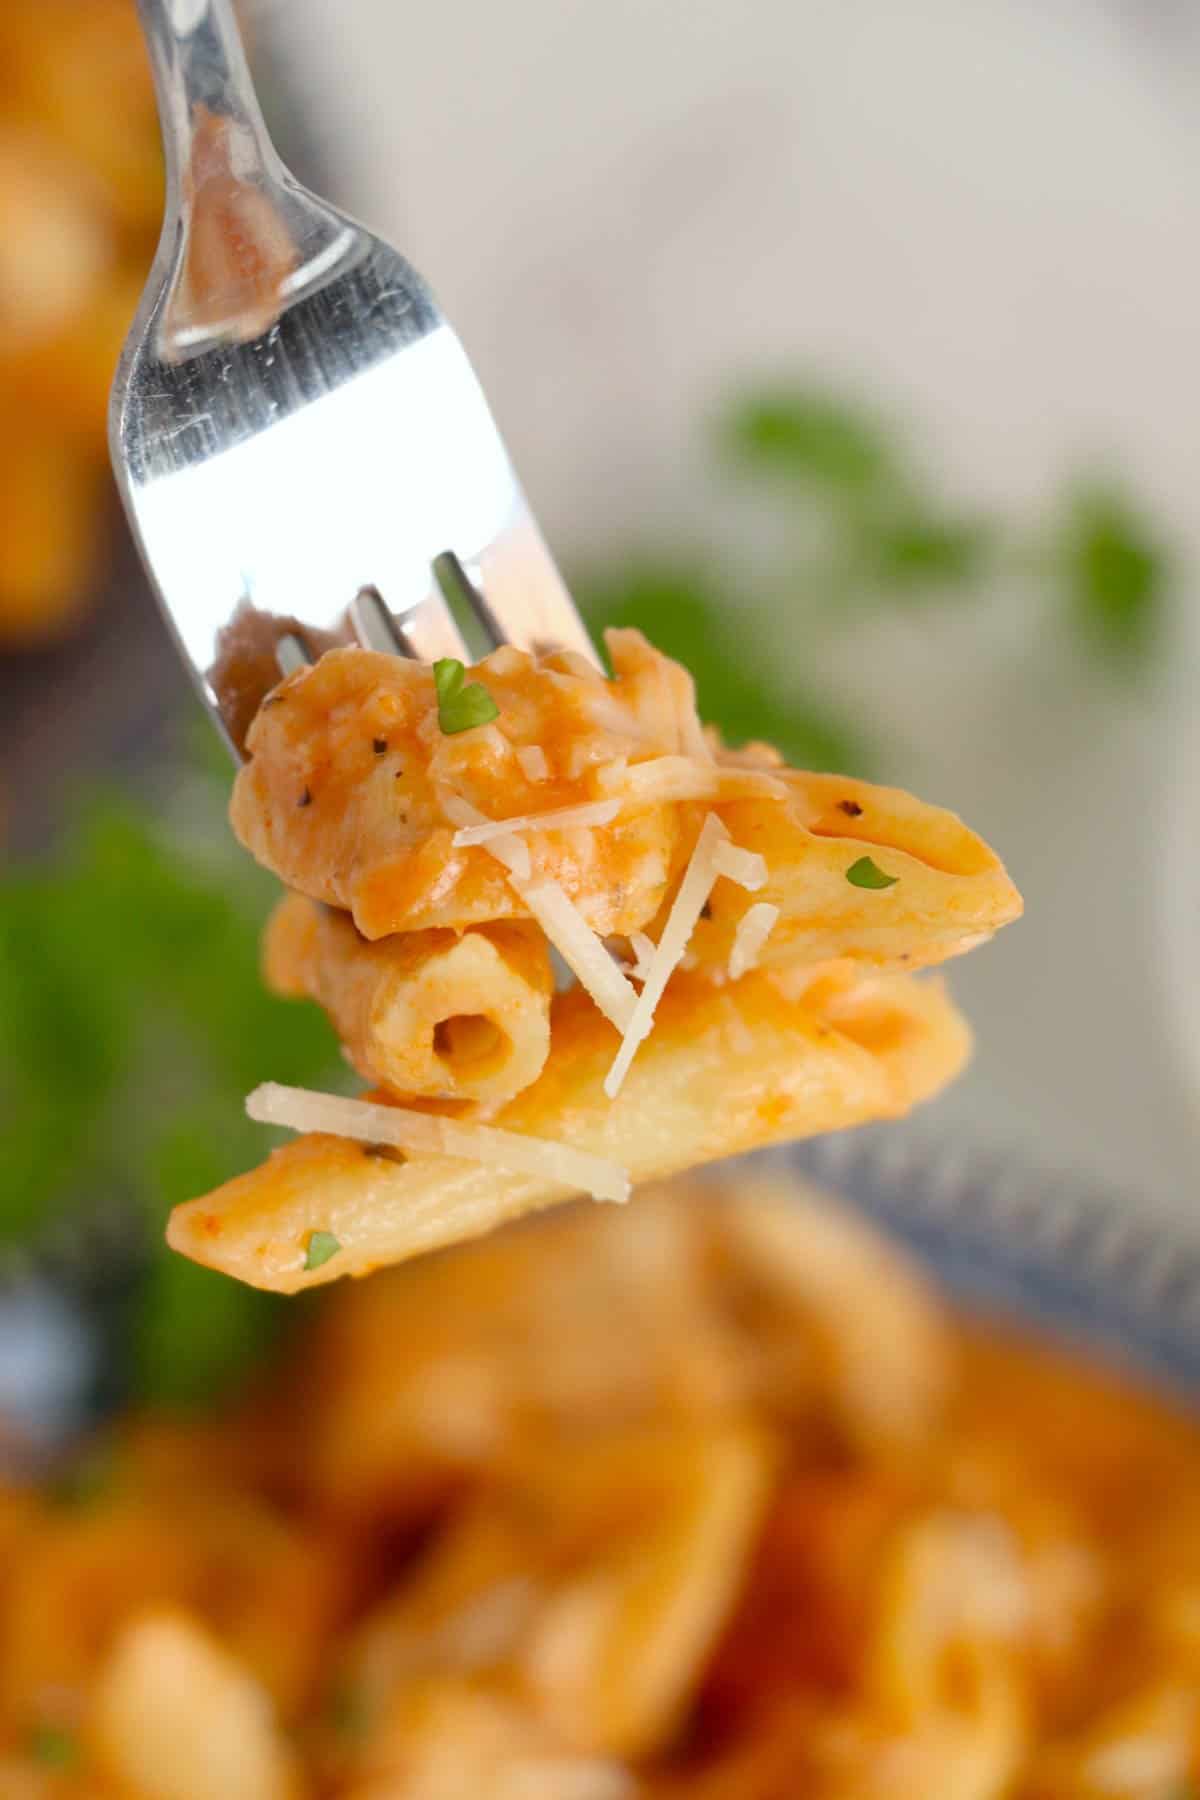 A fork holding up a bite of pasta in a tomato sauce.